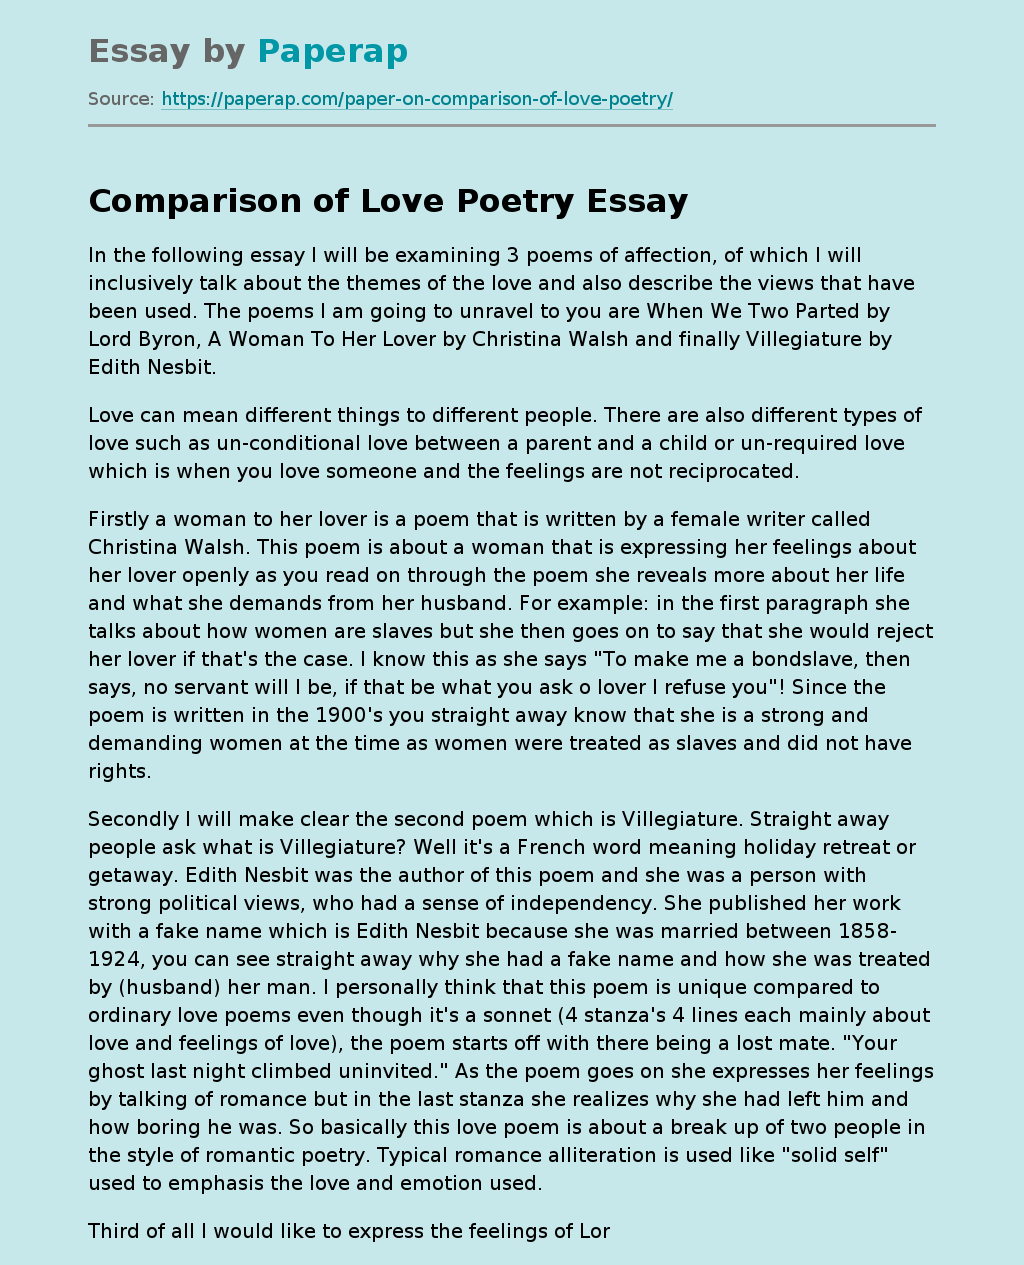 Comparison of Love Poetry